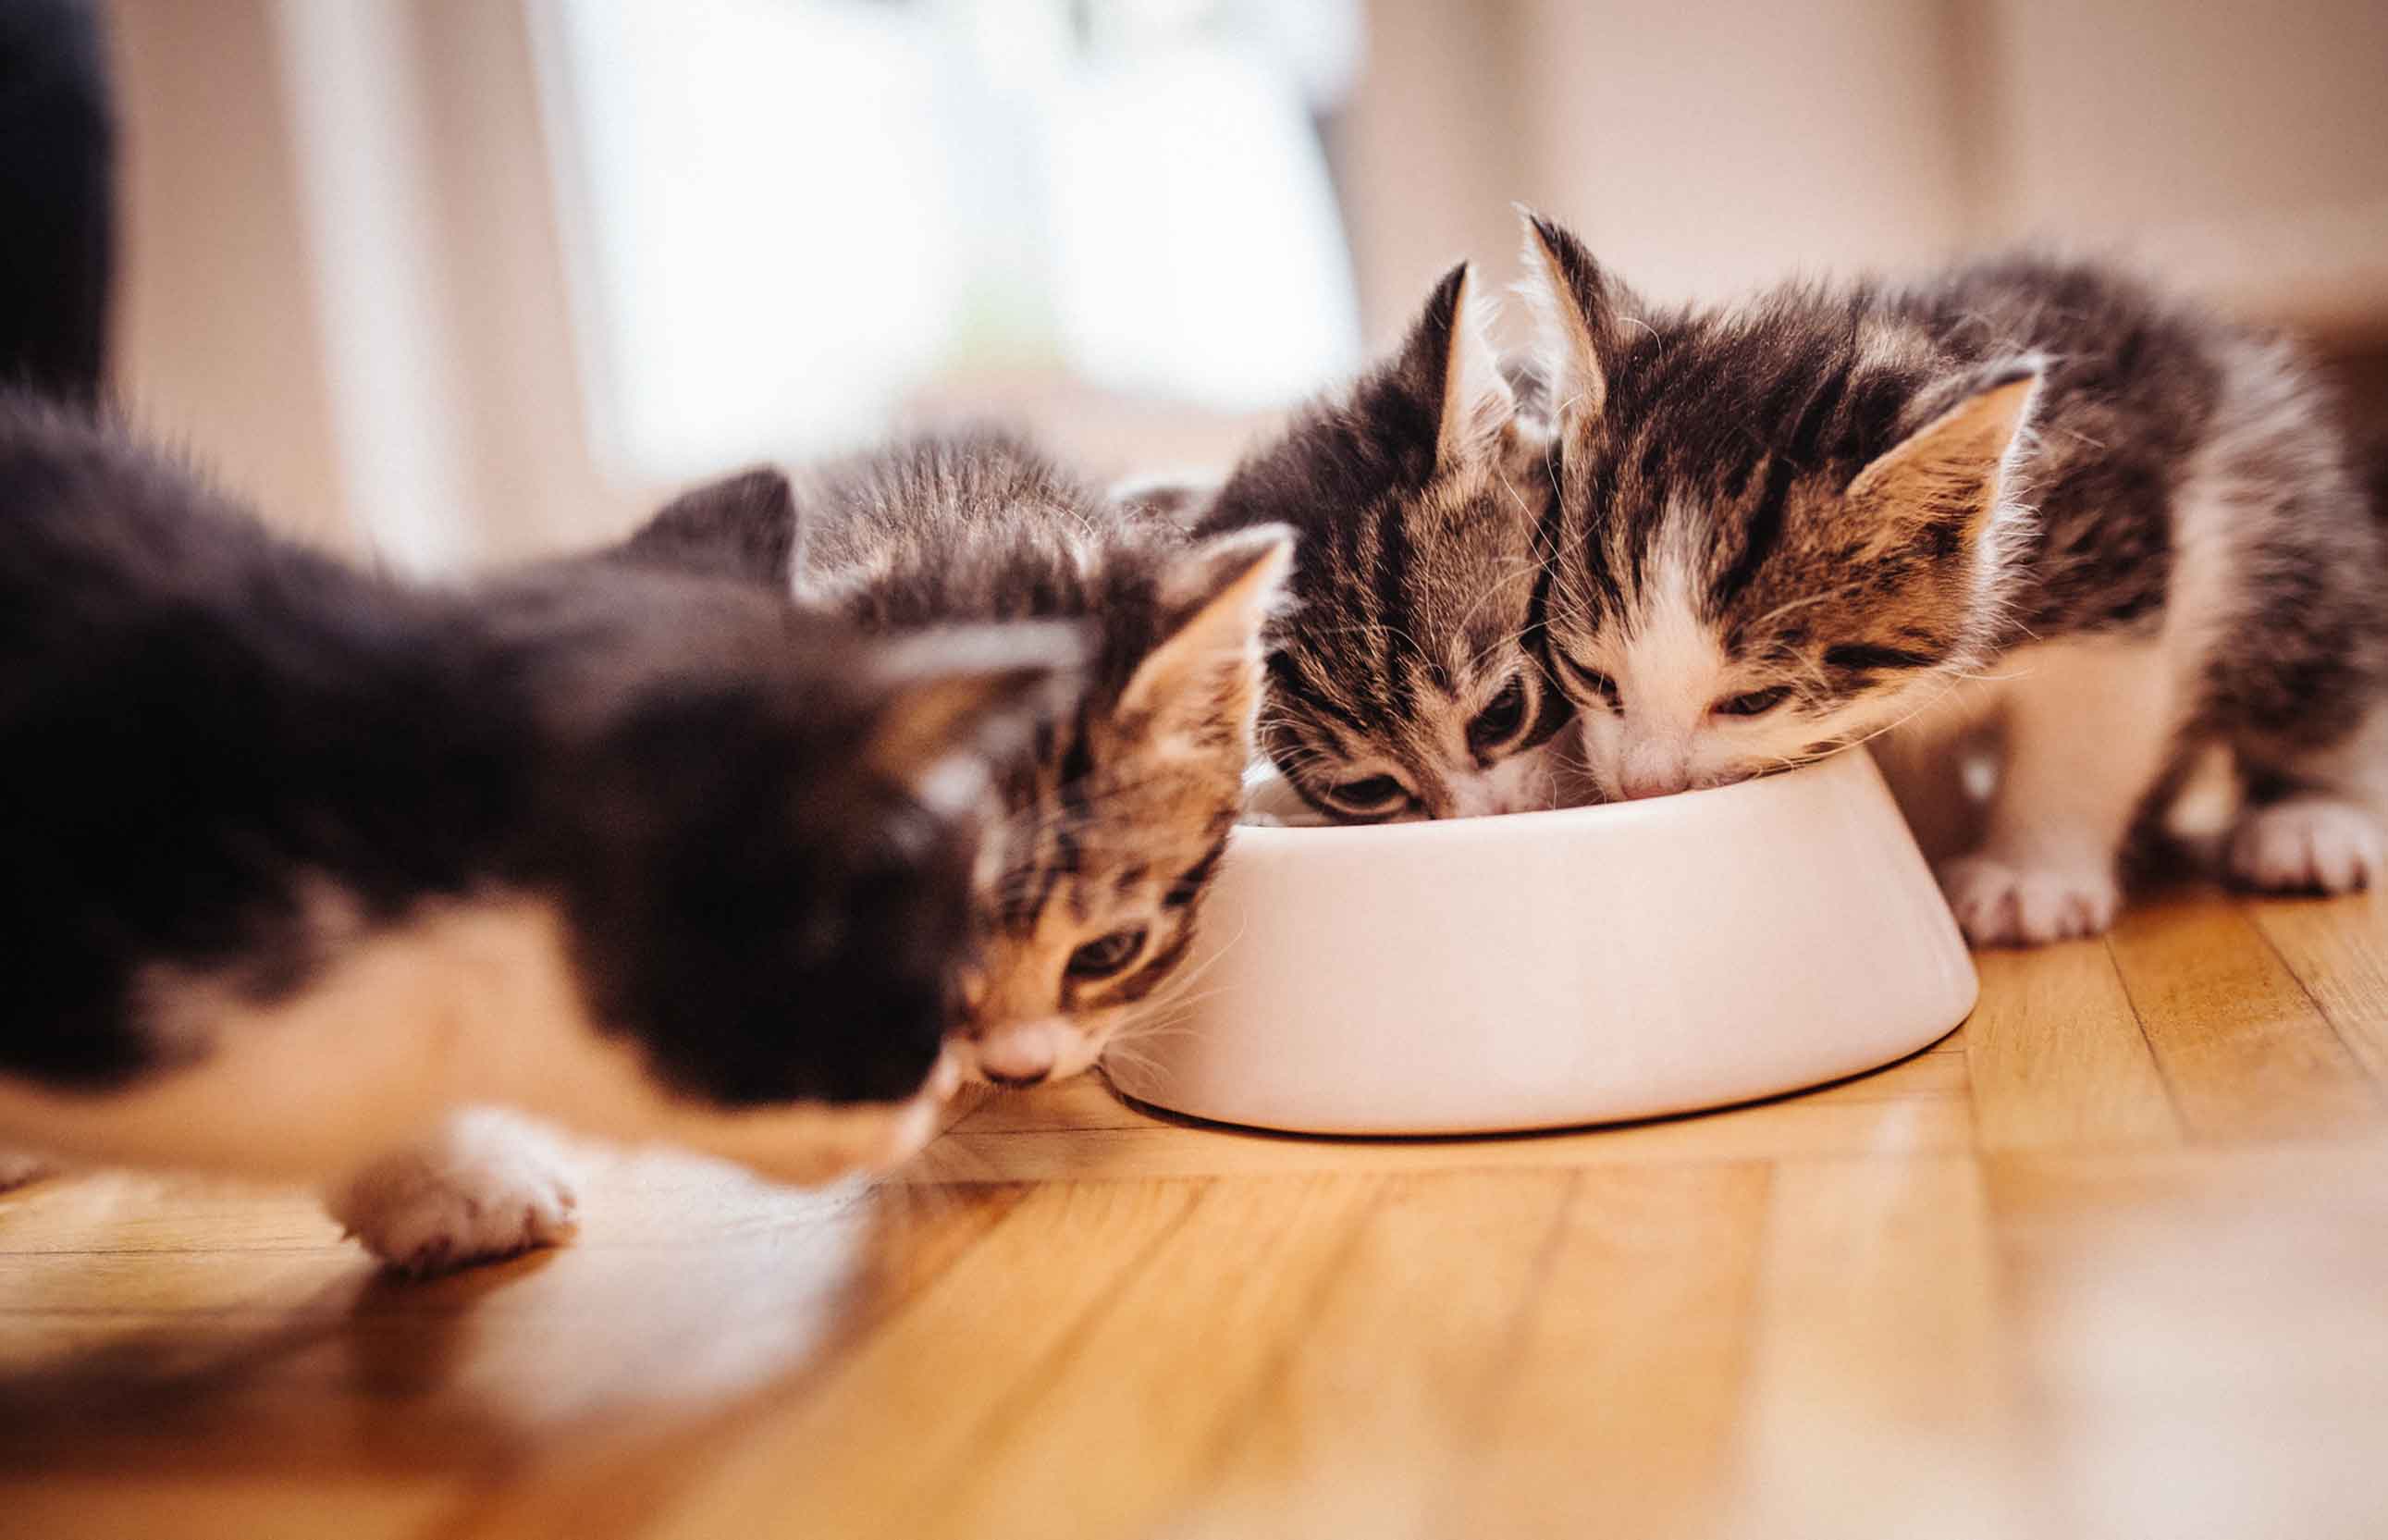 Pet food is a recurring cost that doesn't need to be an expensive one.